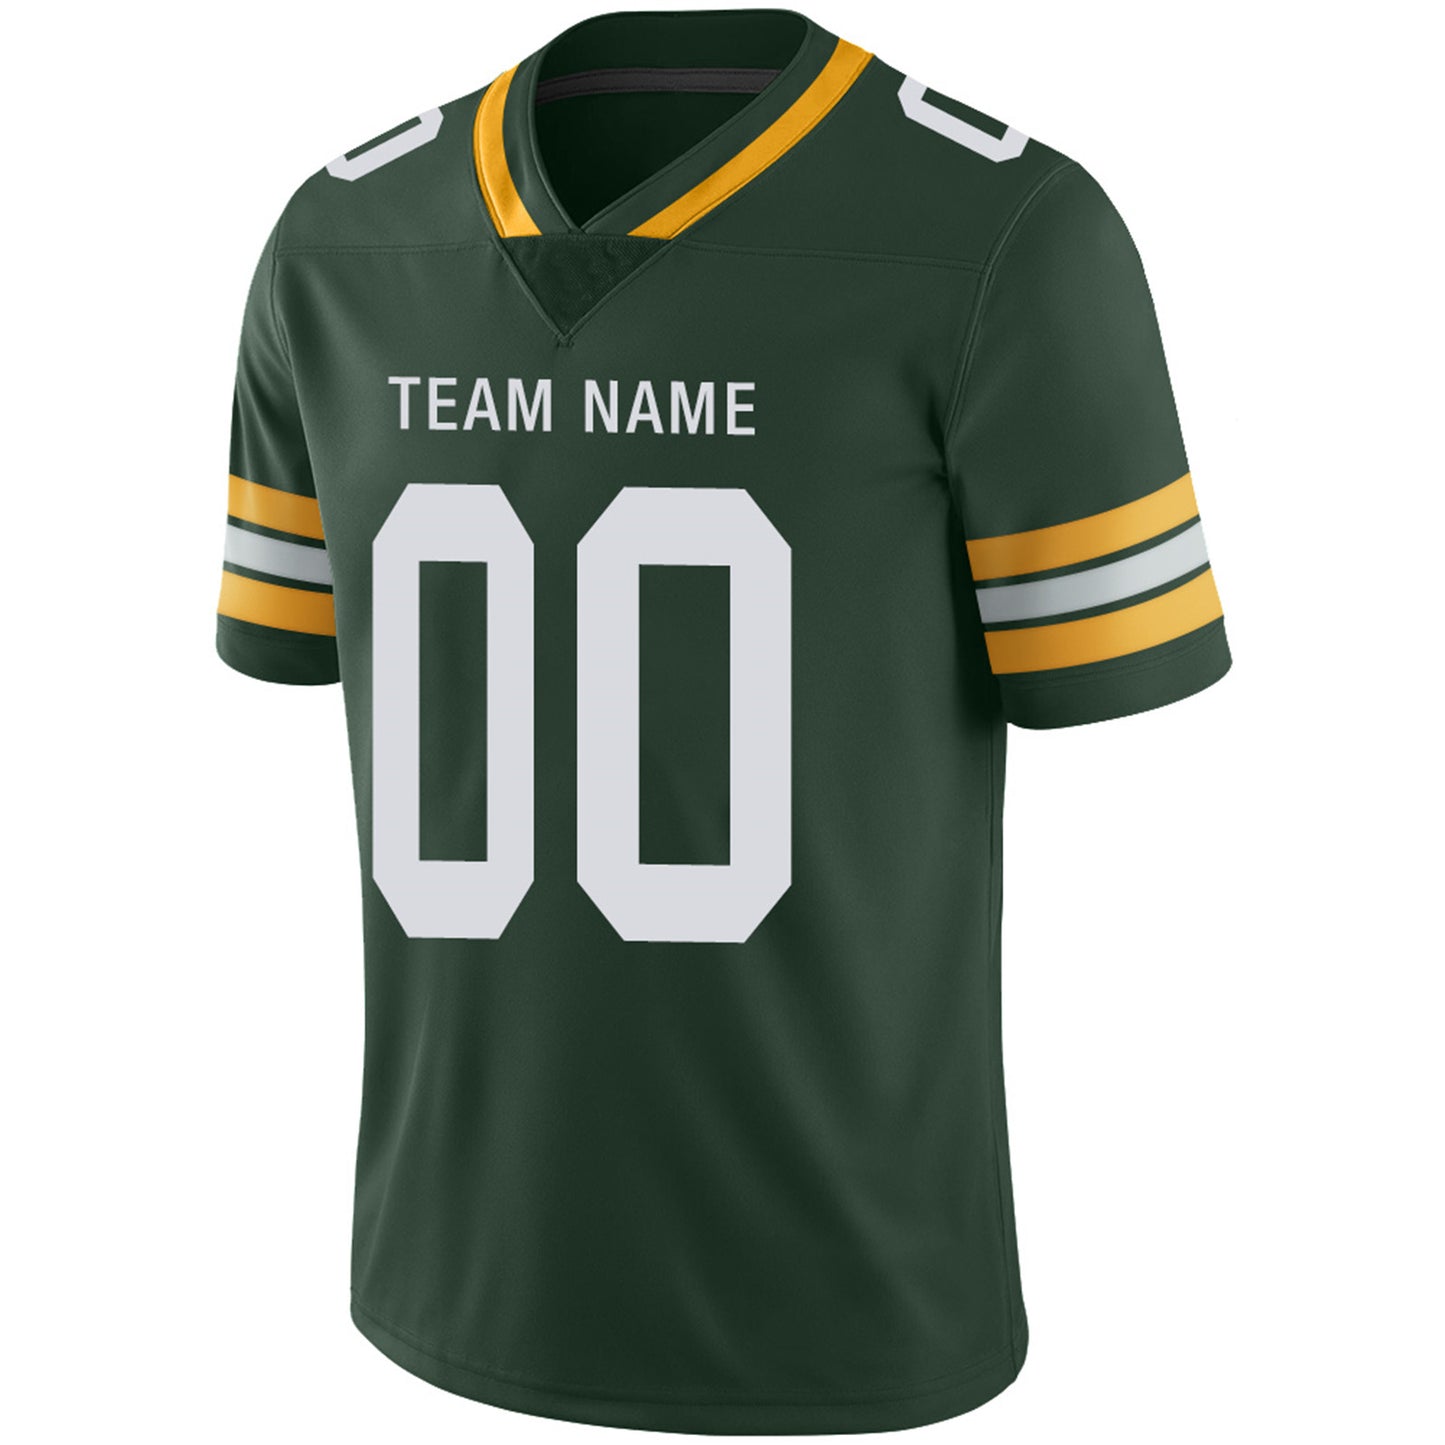 Custom GB.Packers Football Jerseys Team Player or Personalized Design Your Own Name for Men's Women's Youth Jerseys Green